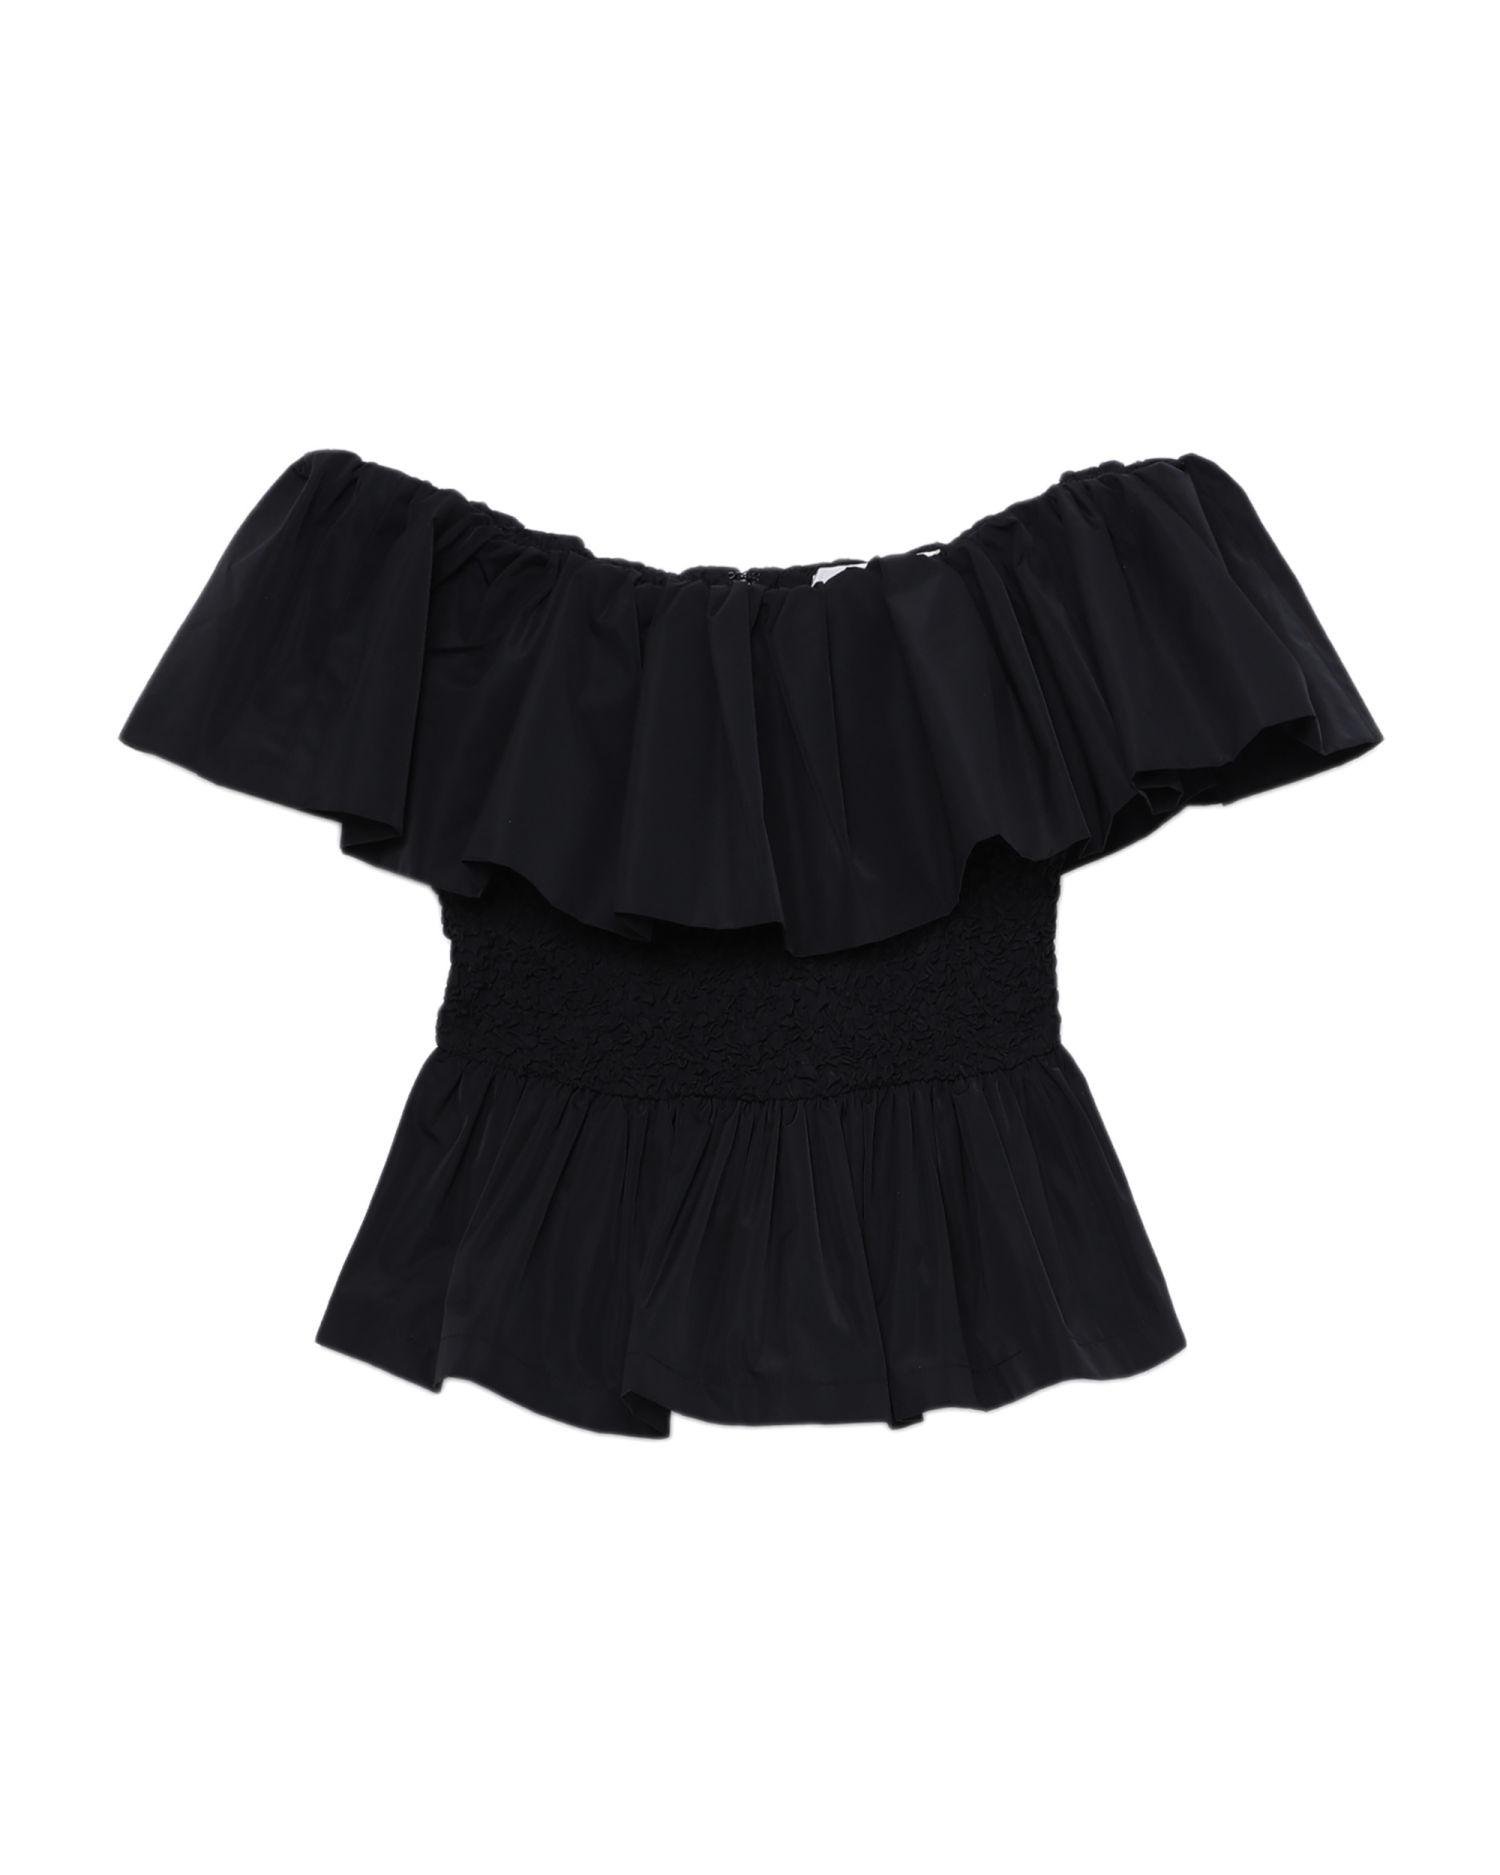 Off-shoulder top by SEA NEW YORK